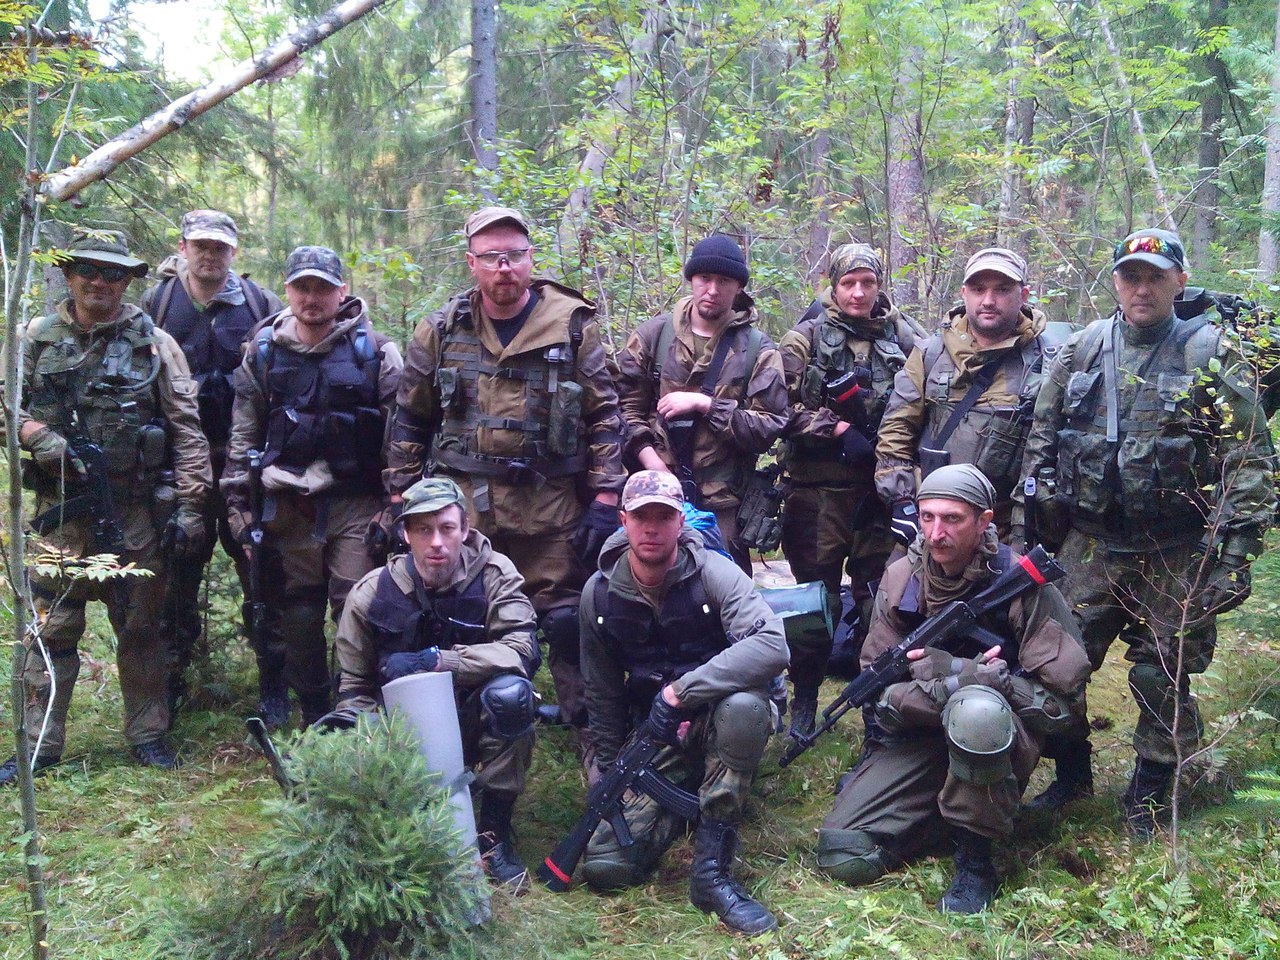 Participants of the "Partisan" military courses, Russia, September 2015